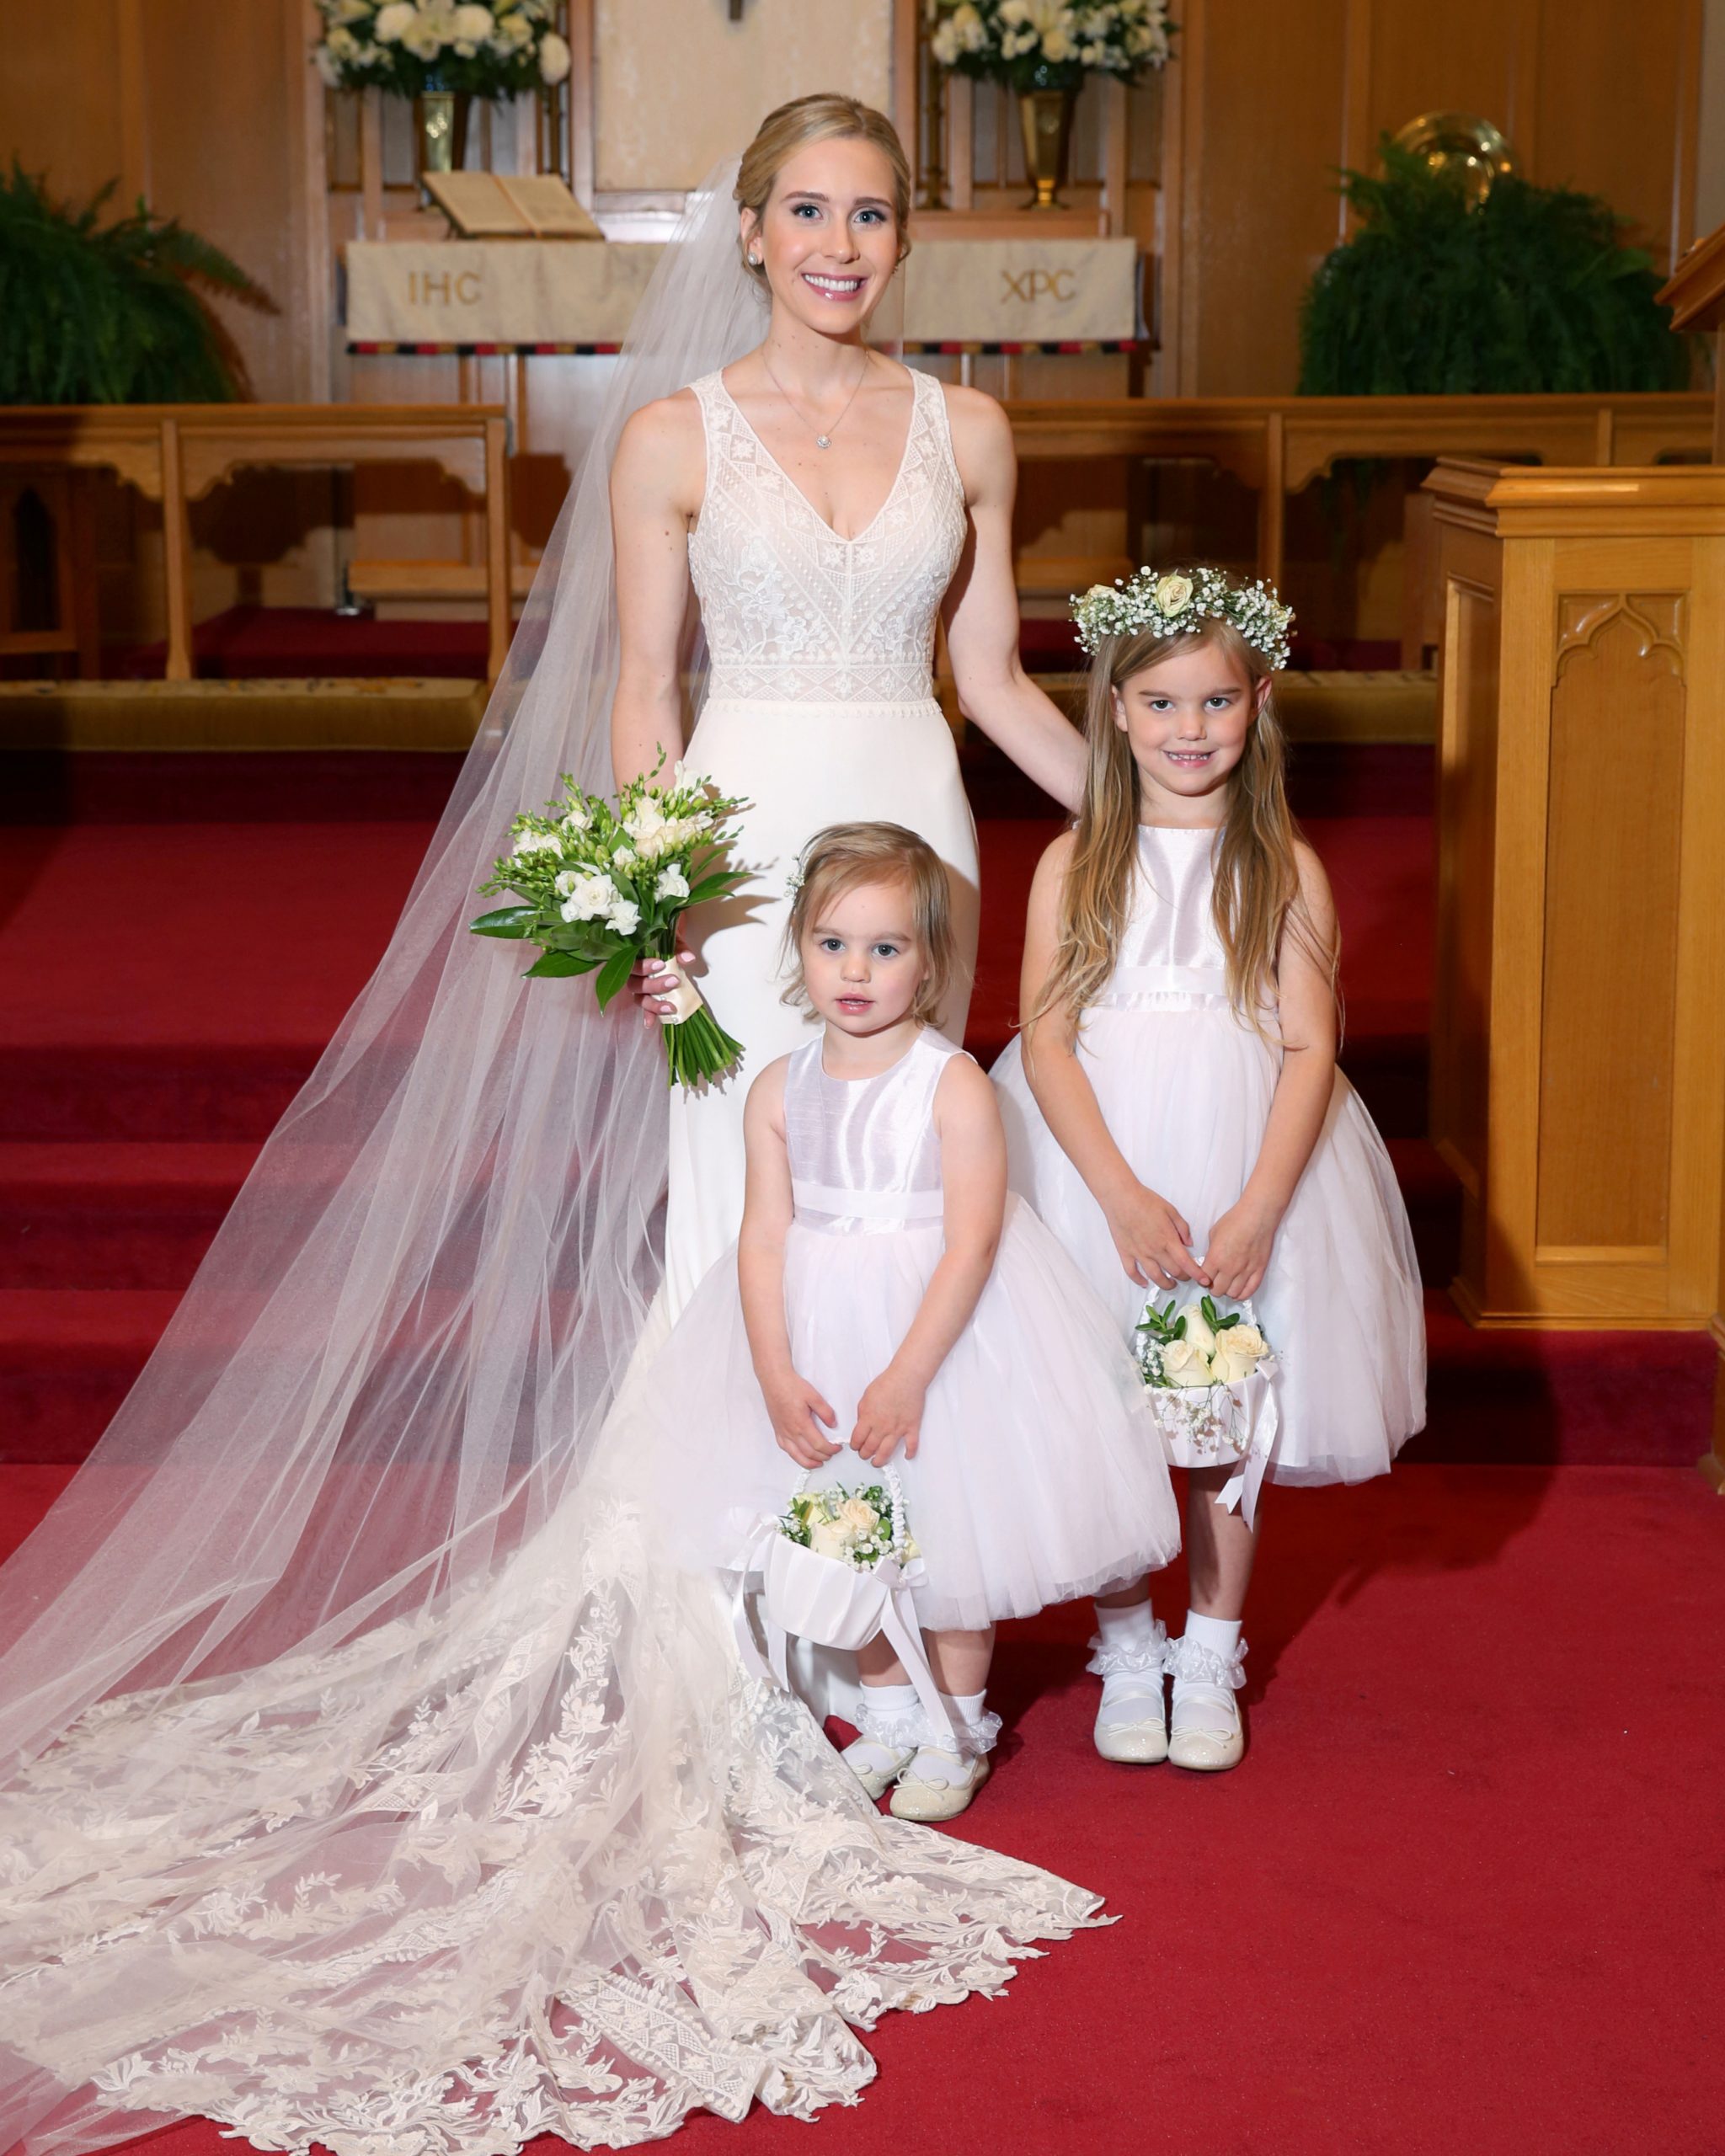 Natalie with her flower girls, her nieces Ella and Payton Richardson. The girls carried baskets of white flowers, while Natalie carried a bouquet of freesias. 